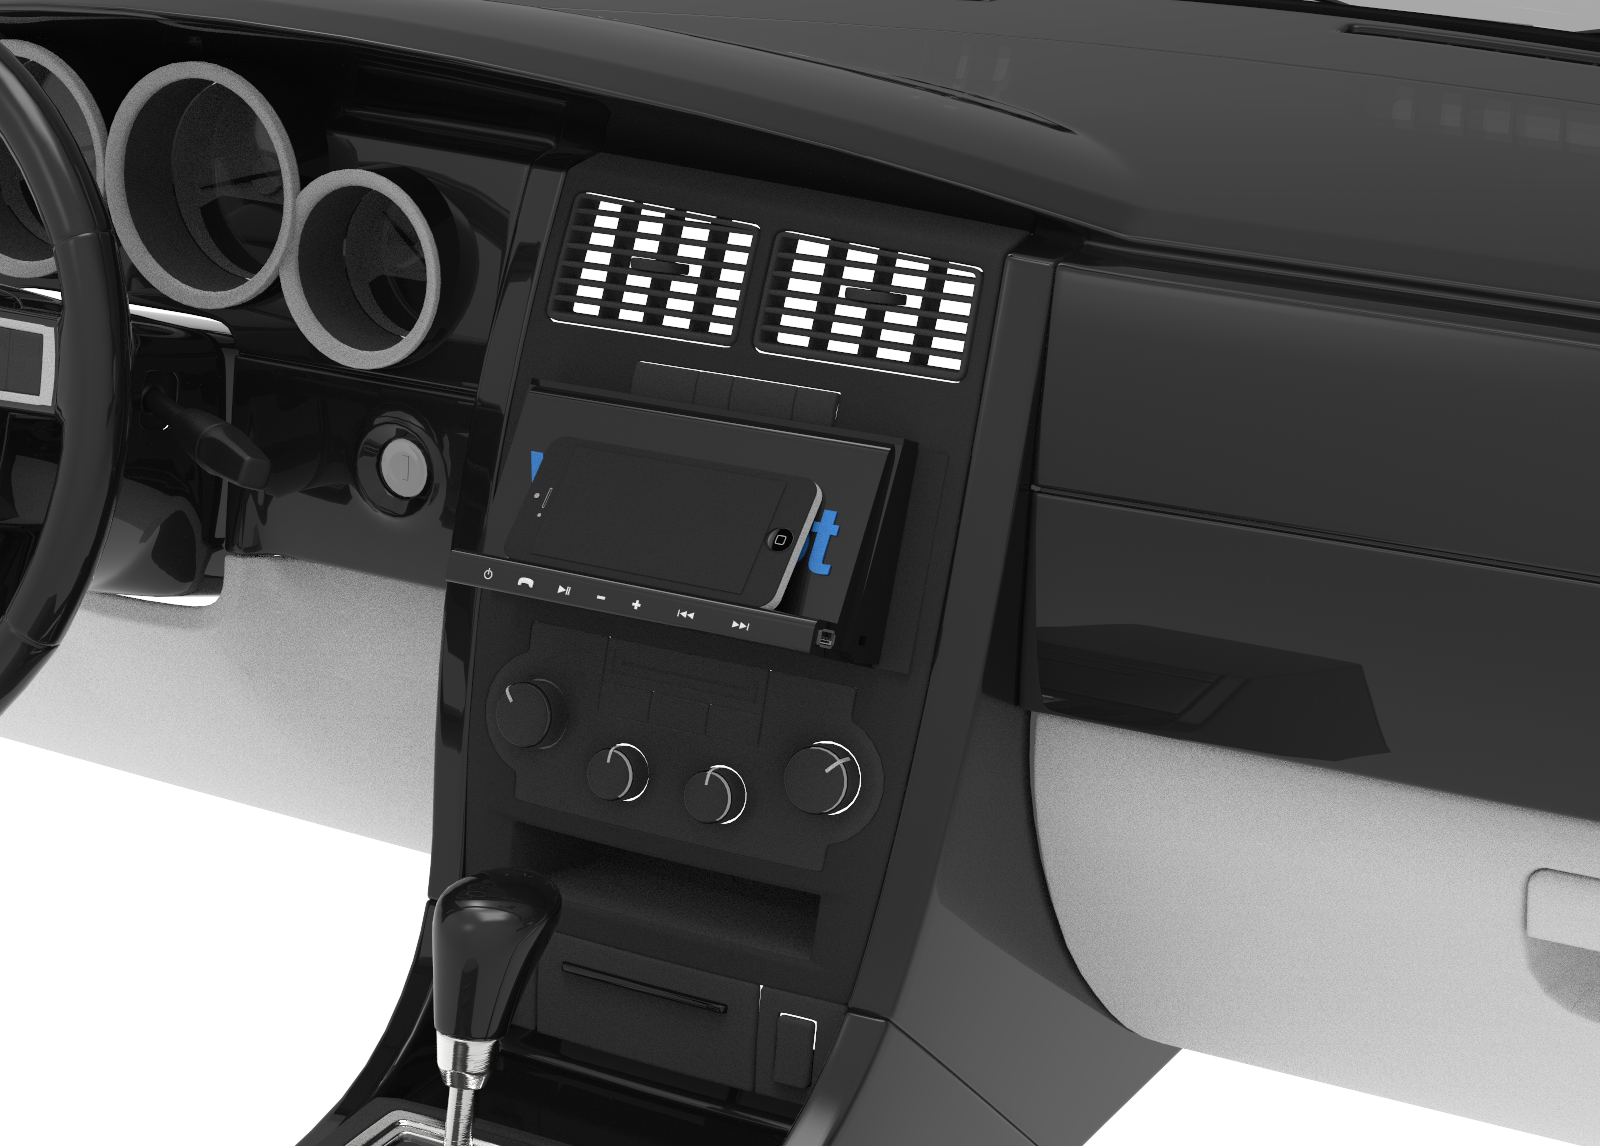 Hello Car also features a special design which allows users to store their smart phones and tablets